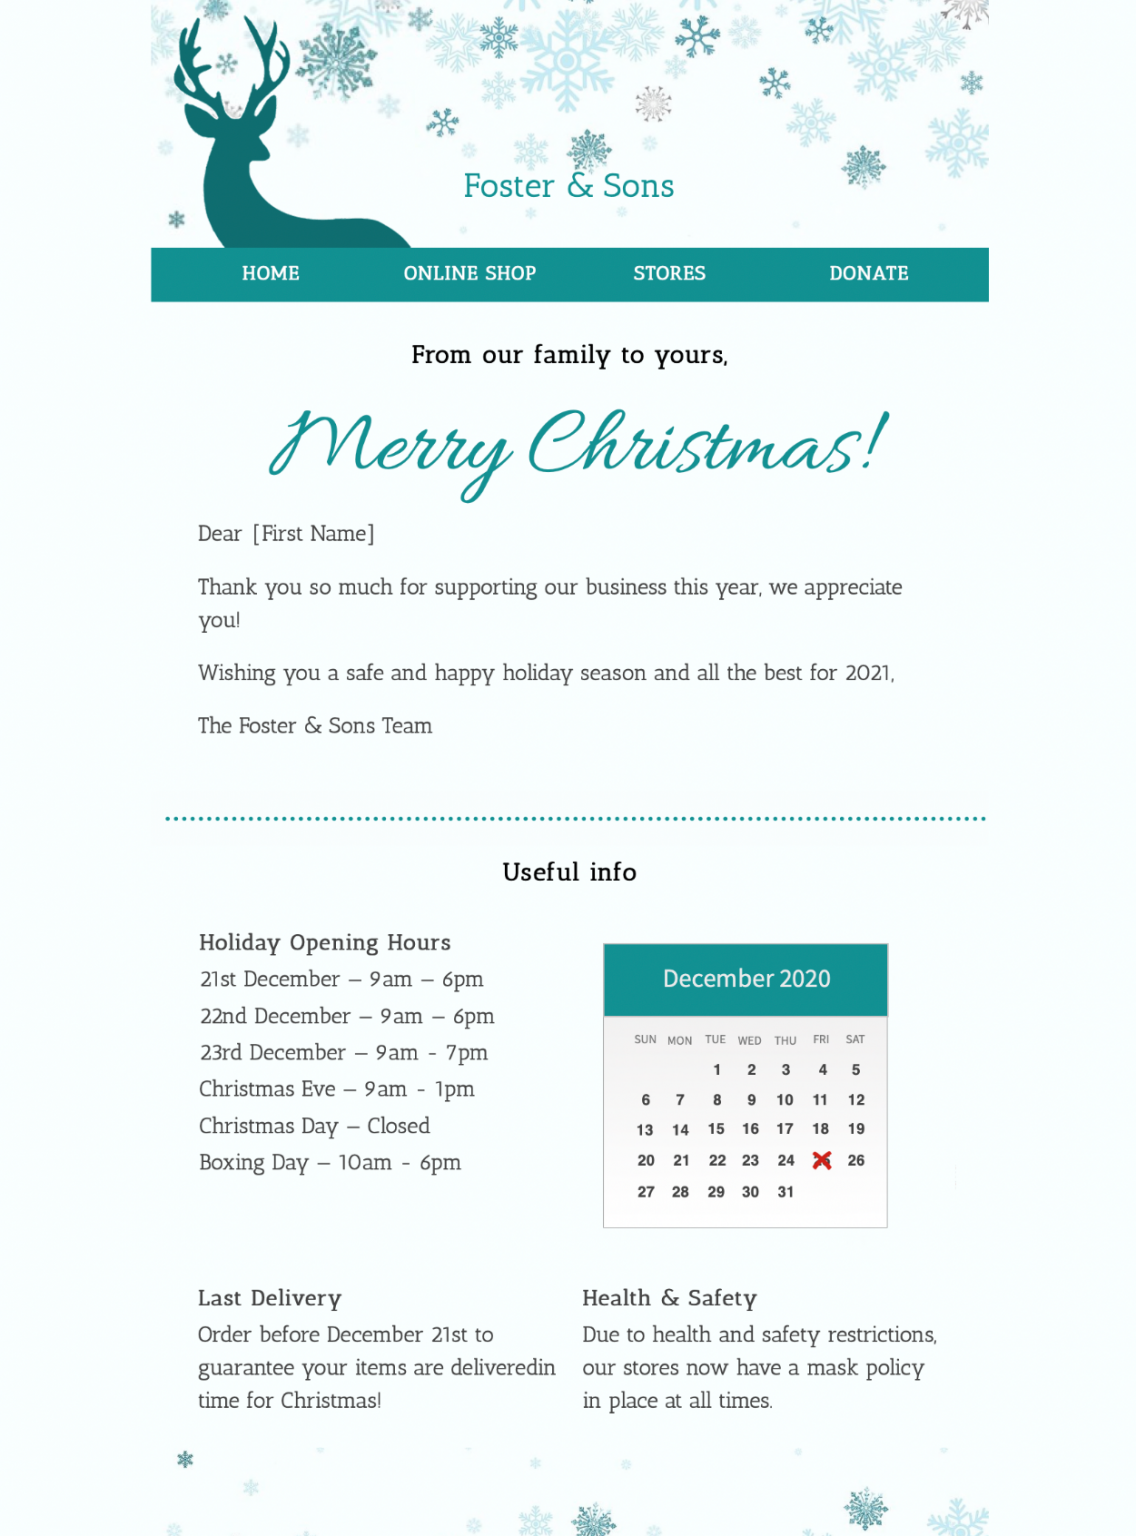 Merry Christmas HTML Email Template Mail Designer Create and send